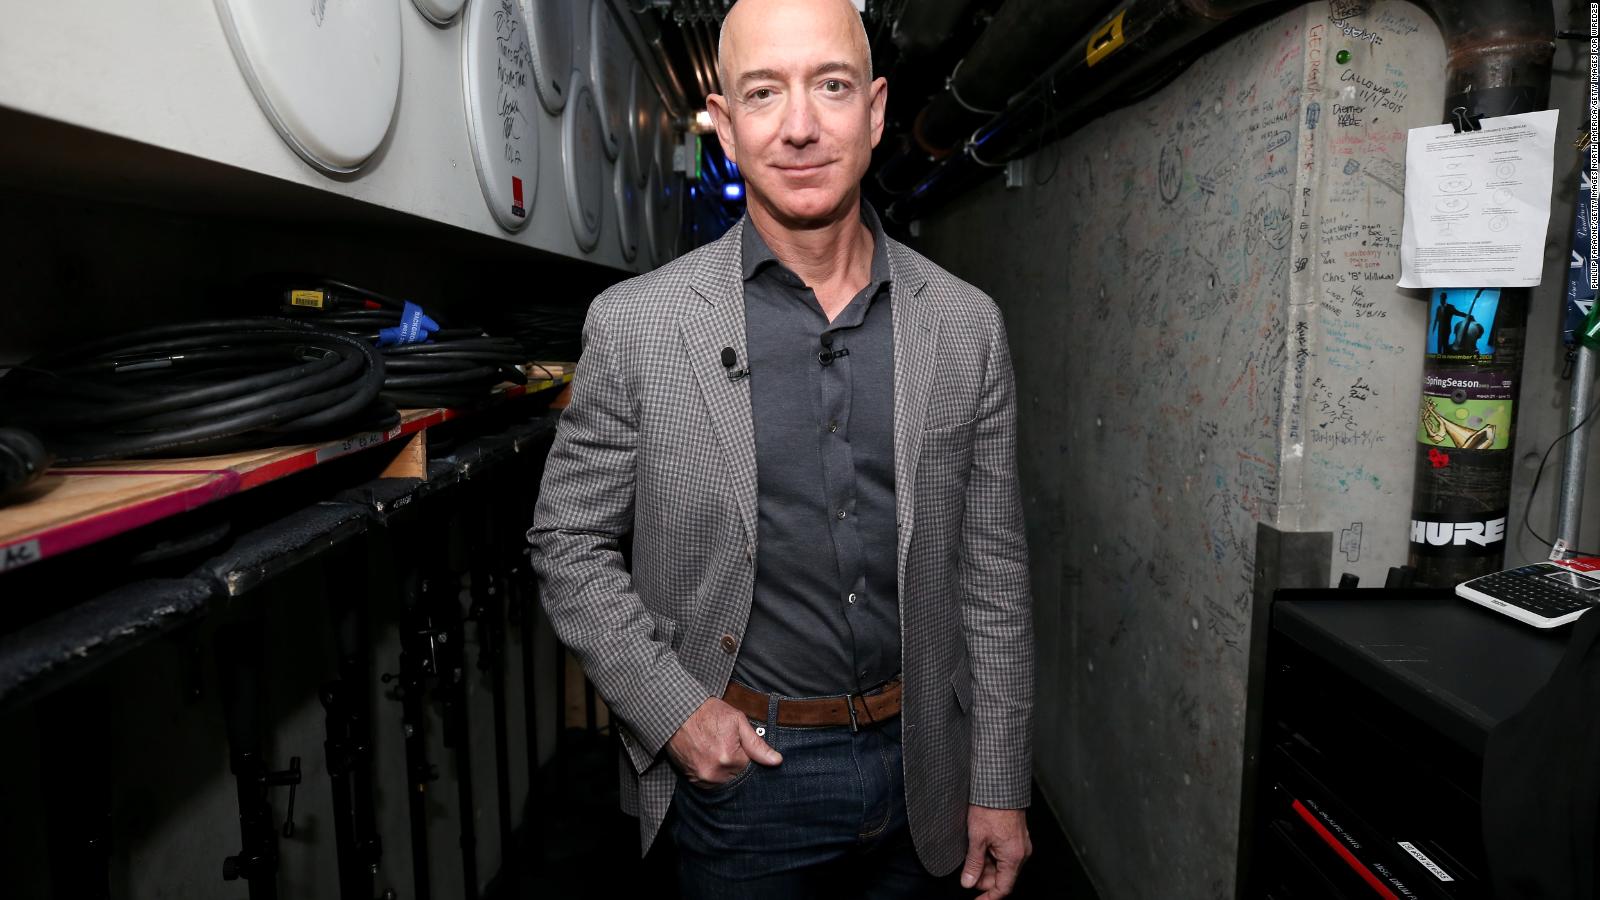 Jeff Bezos supersedes Elon Musk and wants to be the richest man in the world, says Forbes |  Video